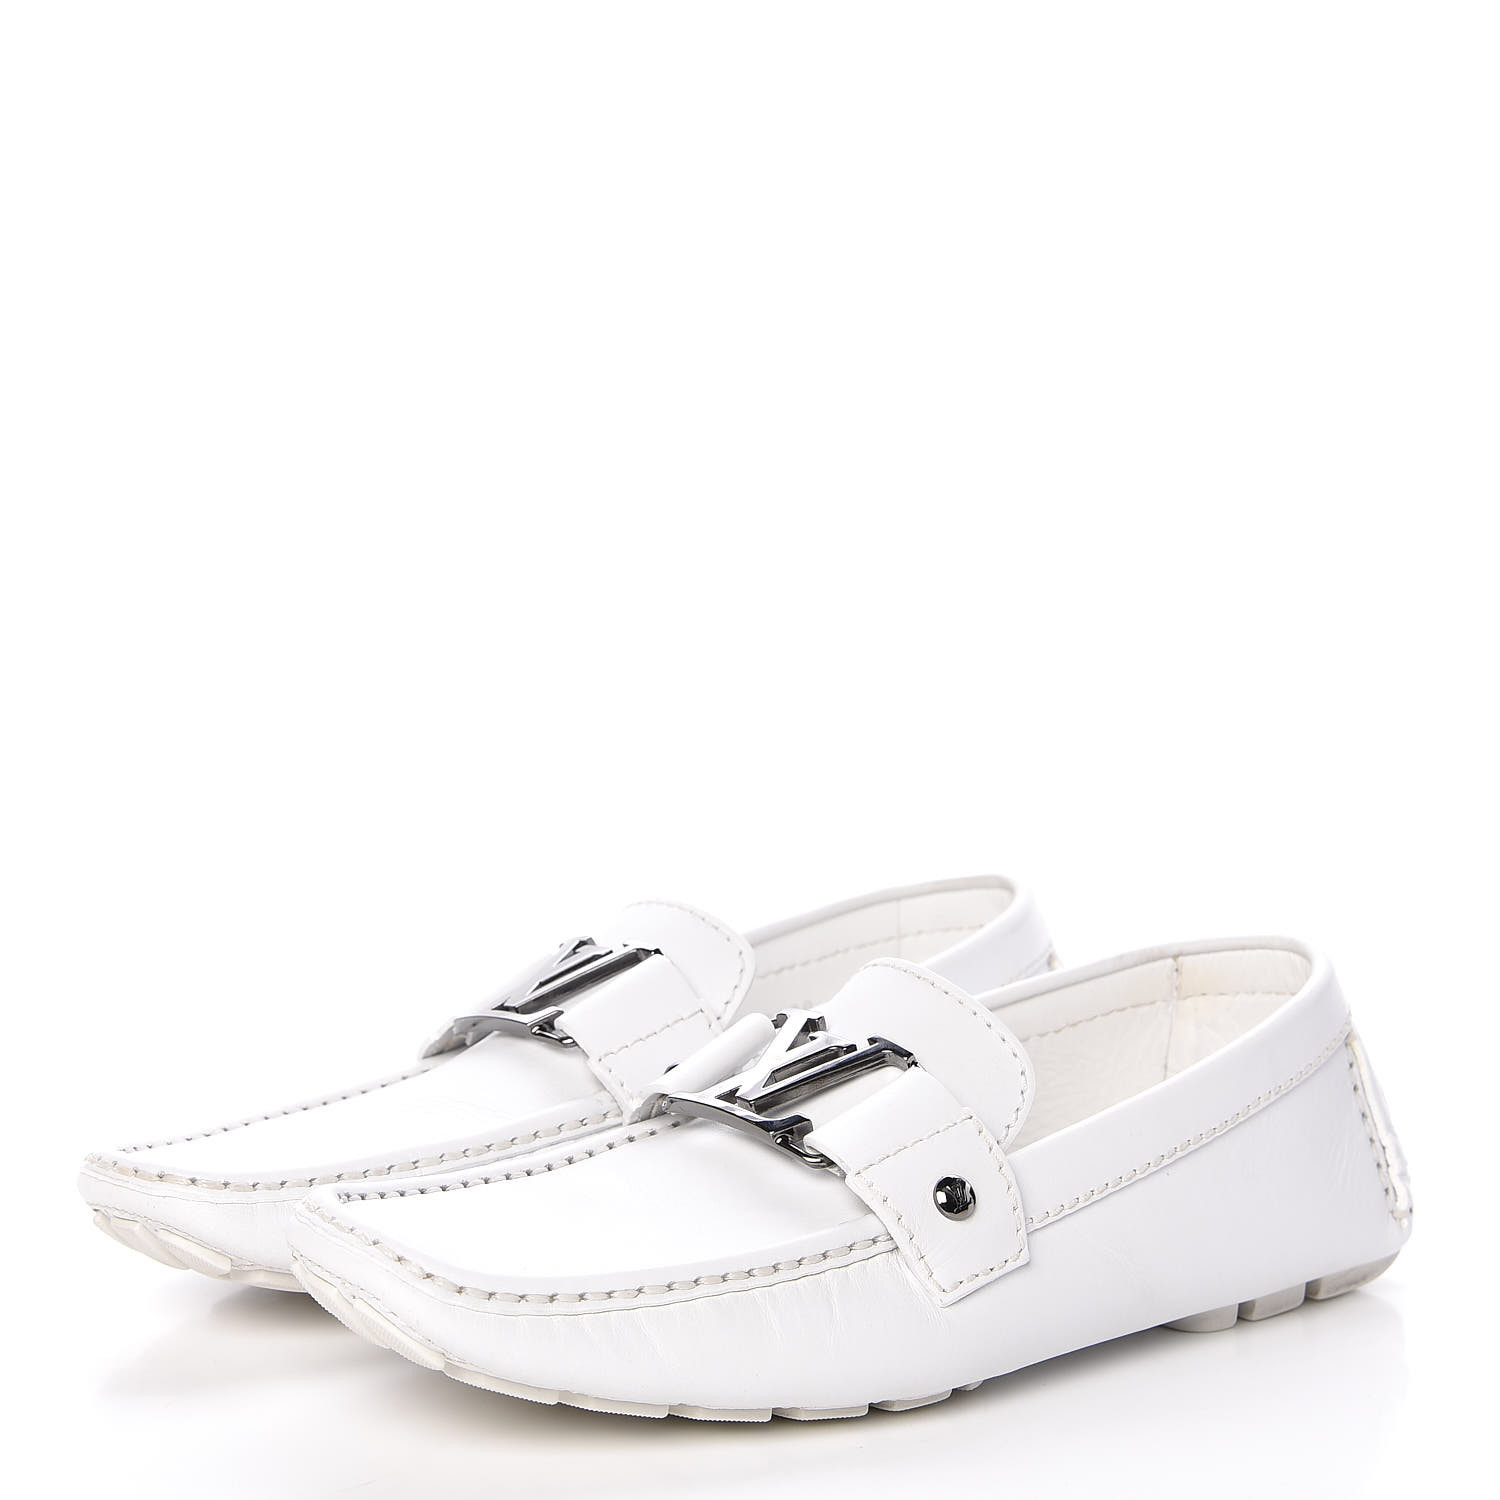 LOUIS VUITTON Calfskin Mens Monte Carlo Moccasin Loafers 6 White 417127